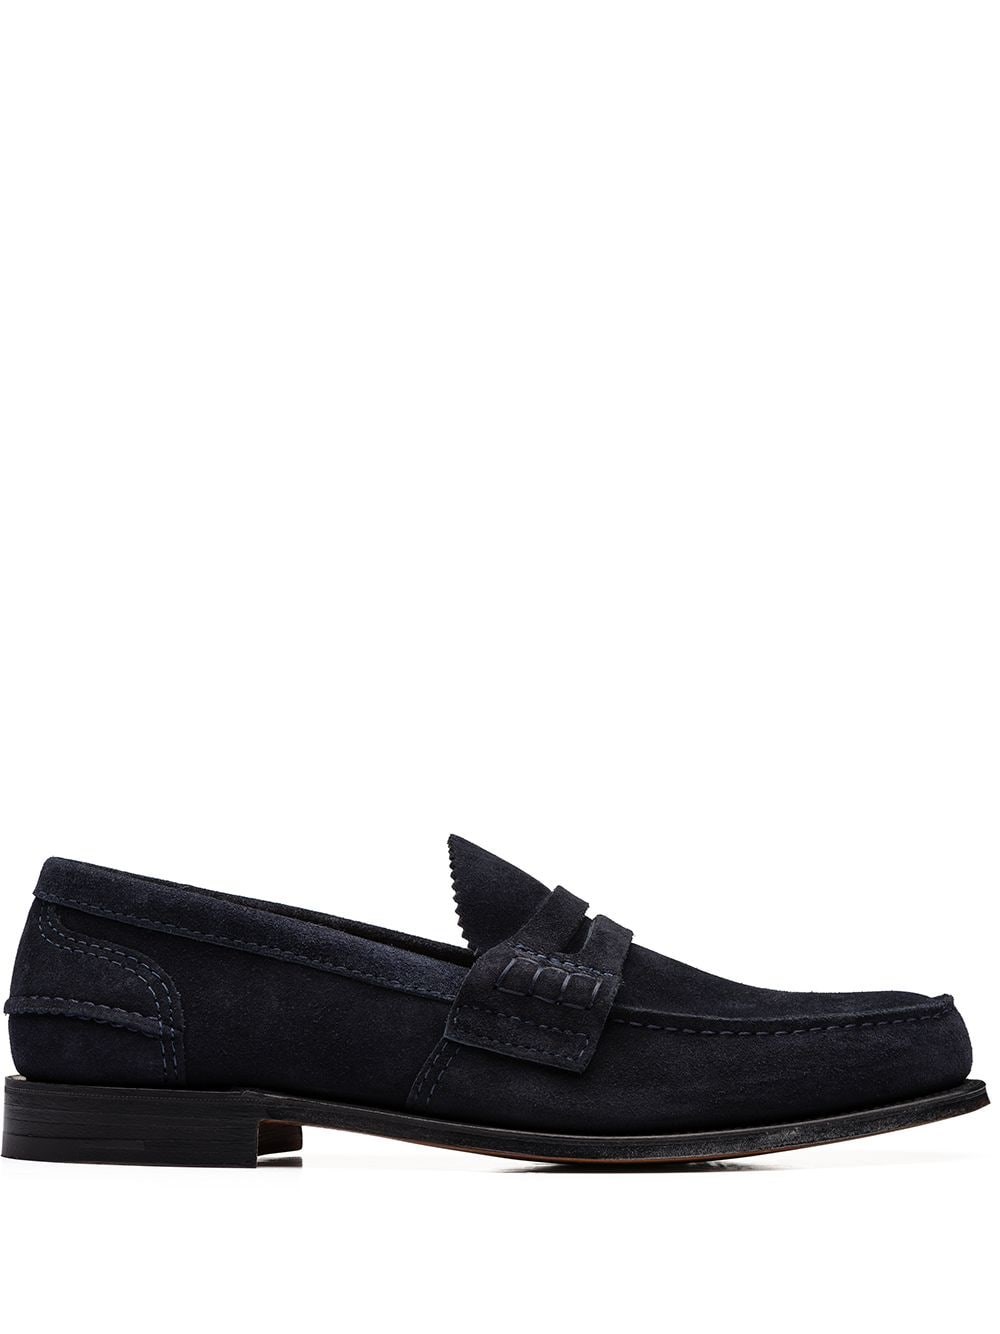 CHURCH'S PEMBREY RODEO LOAFERS